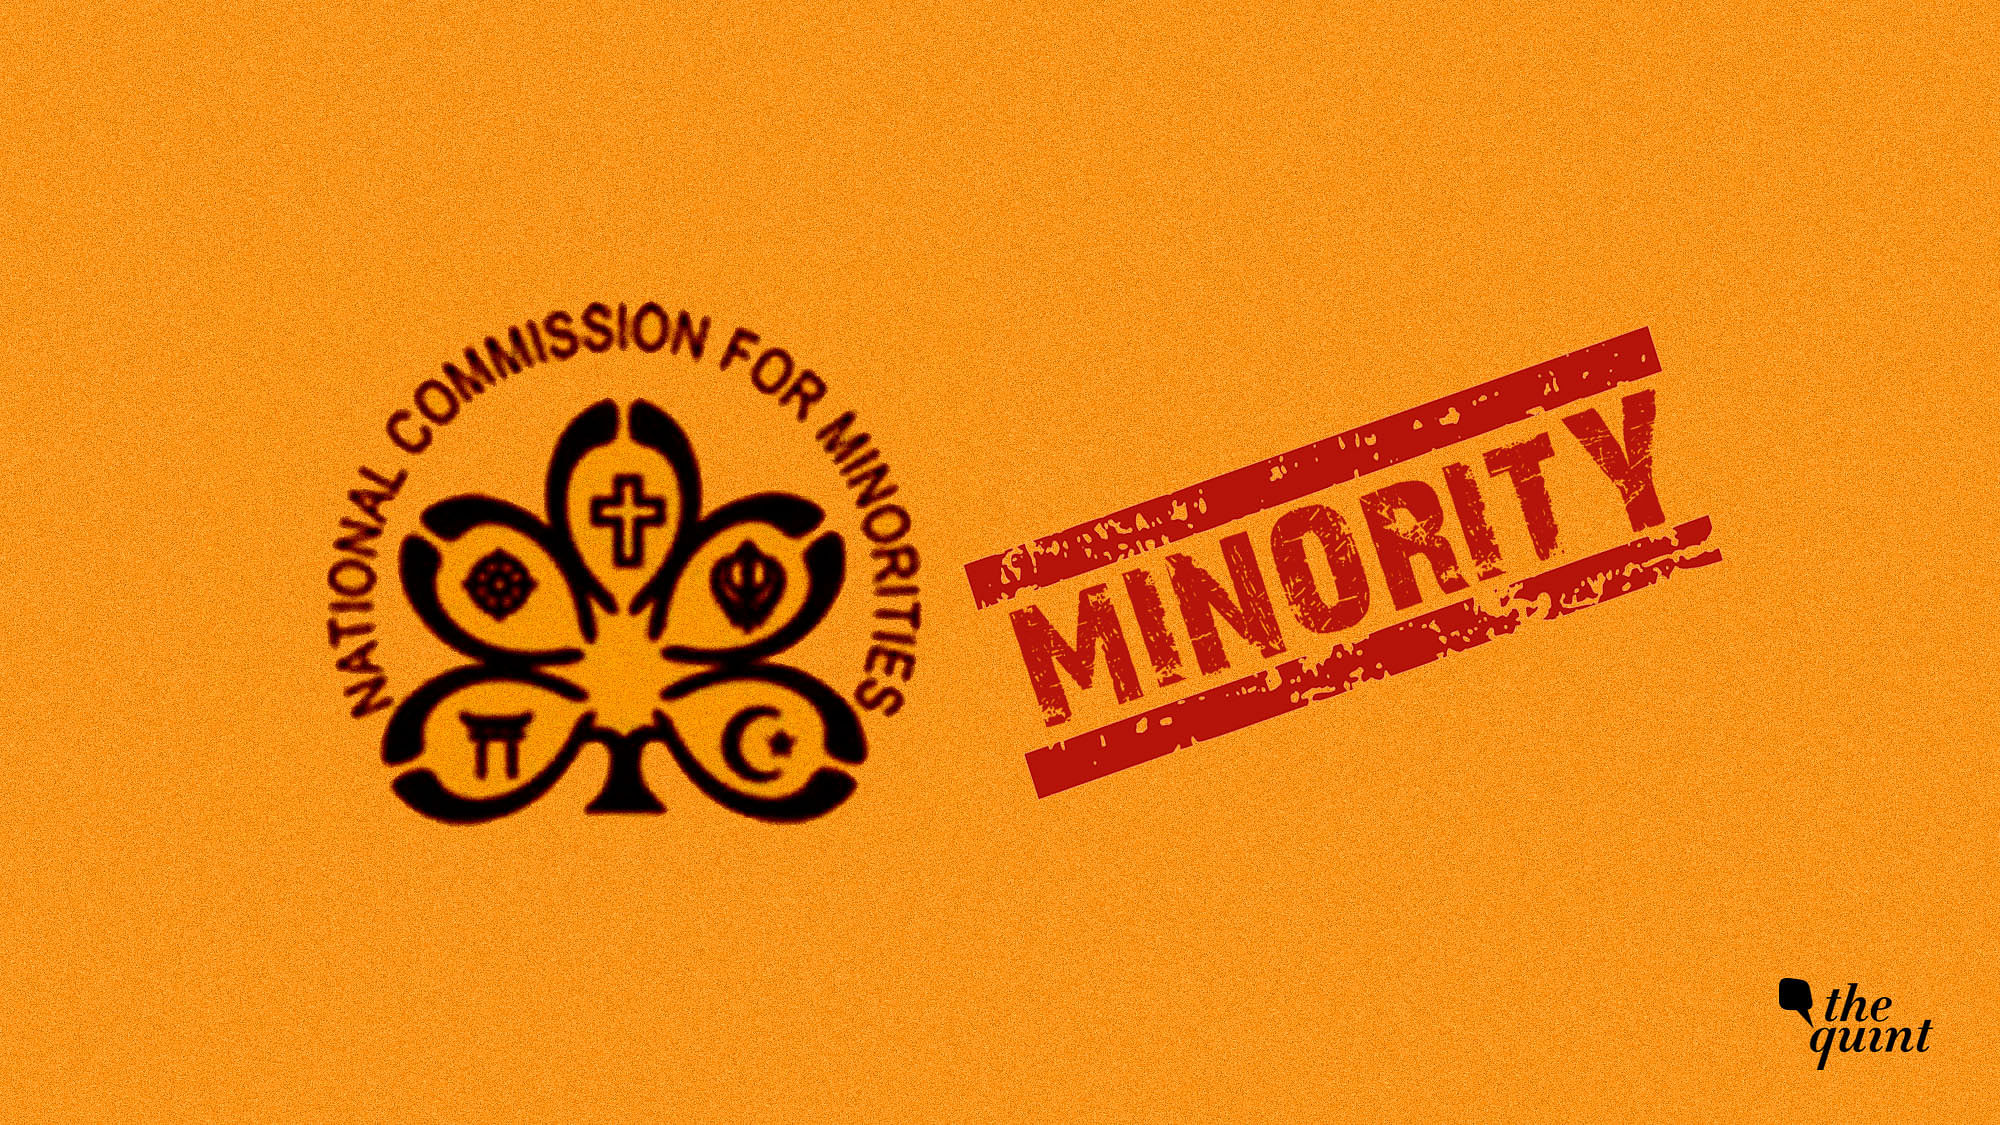 Does the National Commission for Minorities have the power to certify Hindus as a minority anywhere in India?